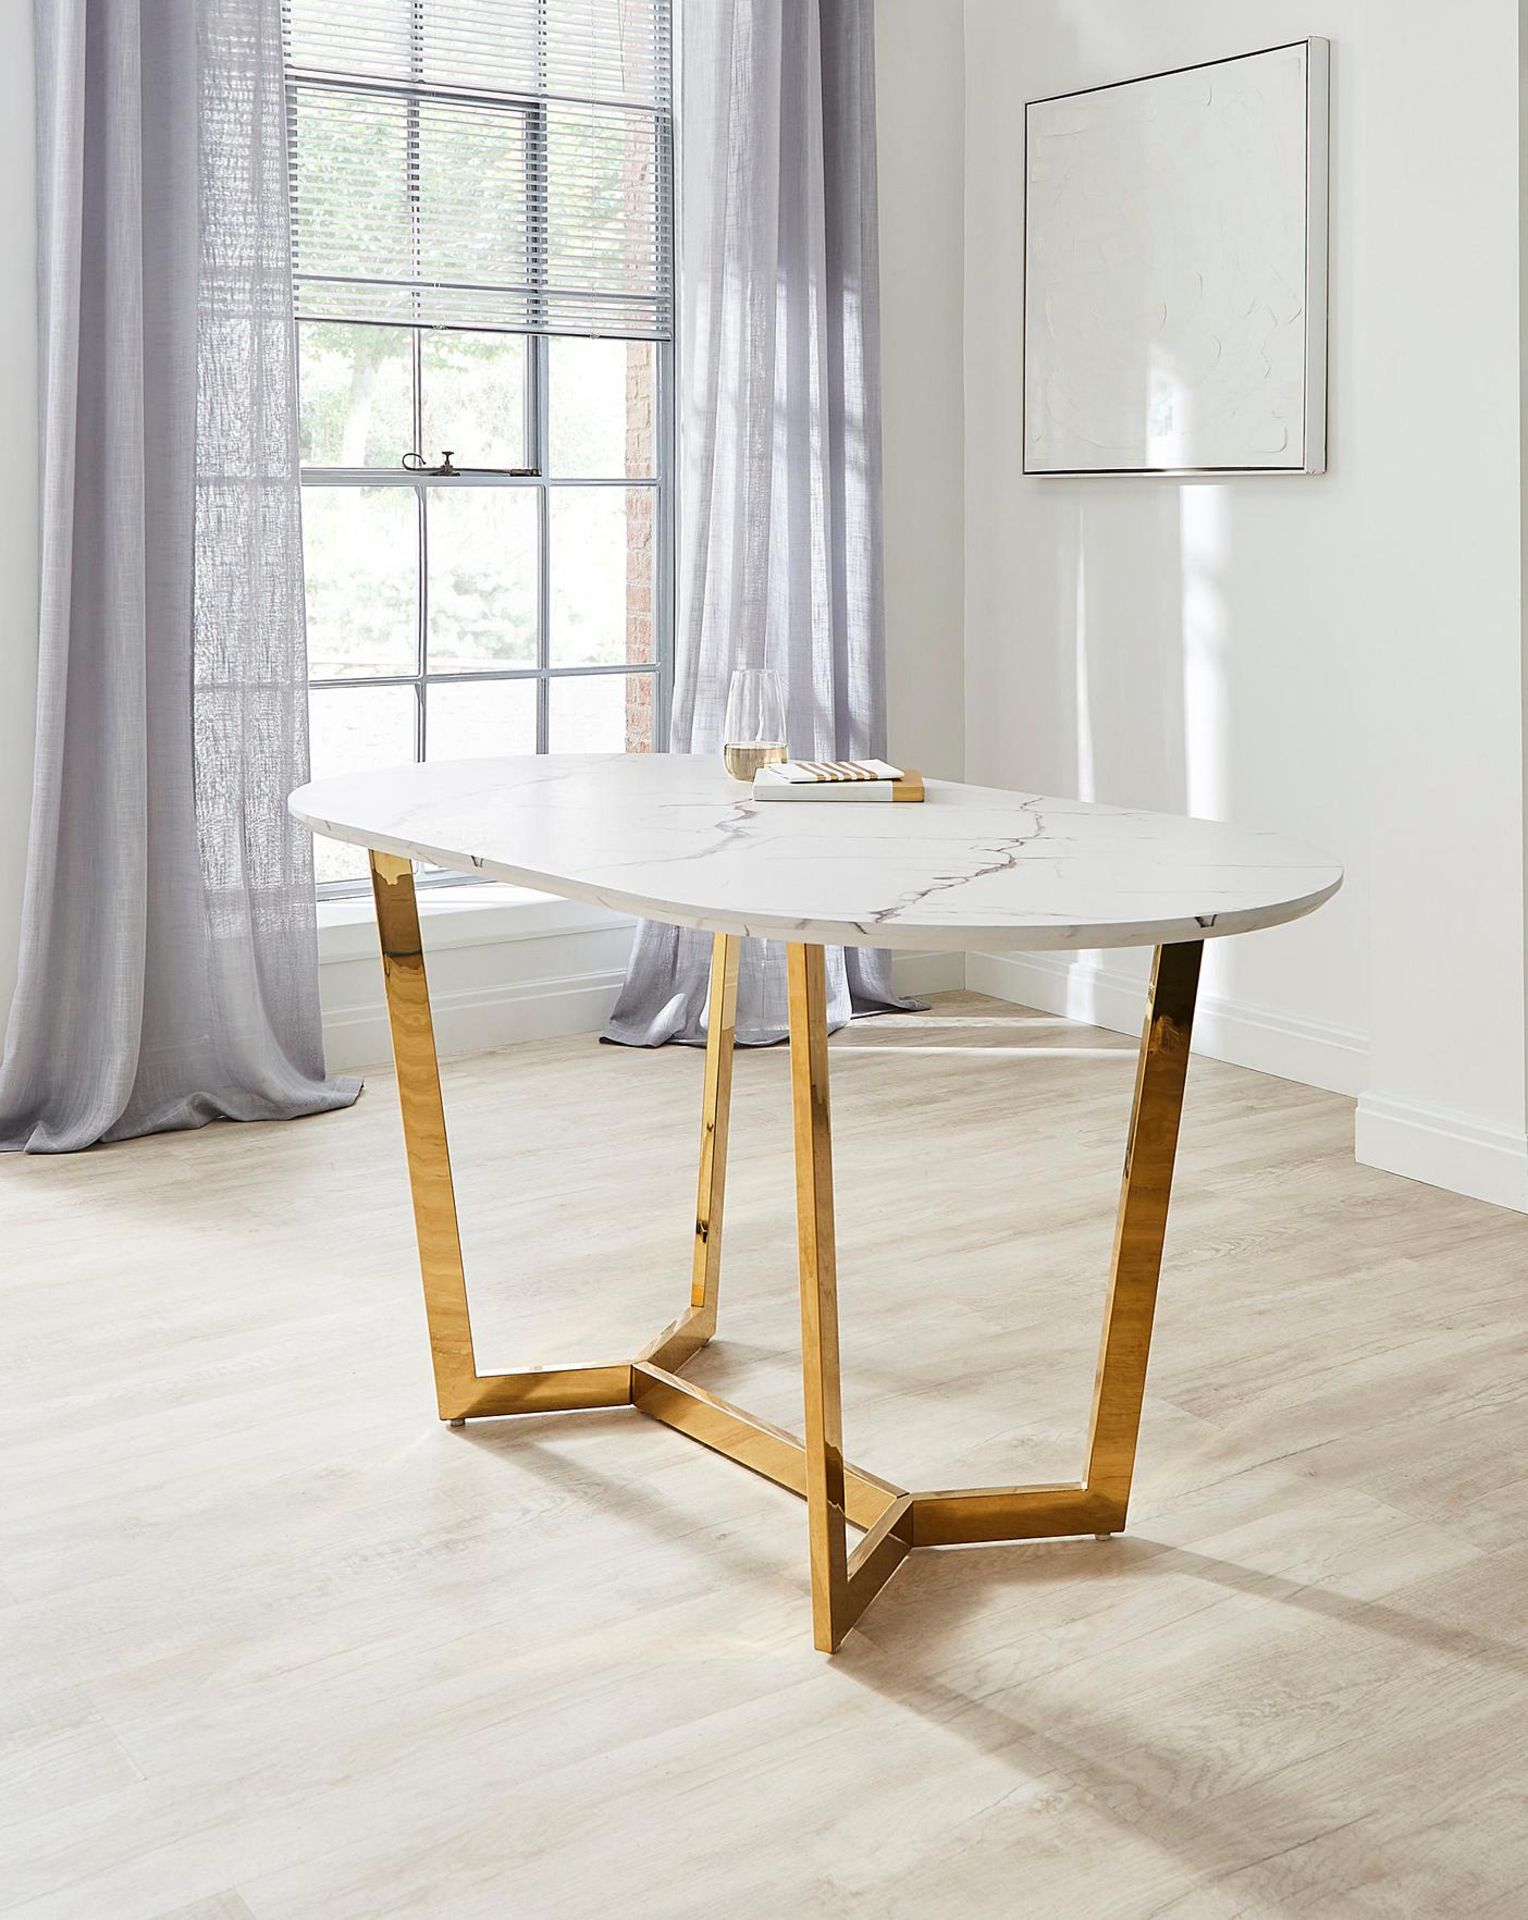 NEW & BOXED JOANNA HOPE Florence Oval Dining Table - MARBLE/GOLD. RRP £449. Part of the Joanna - Bild 2 aus 2